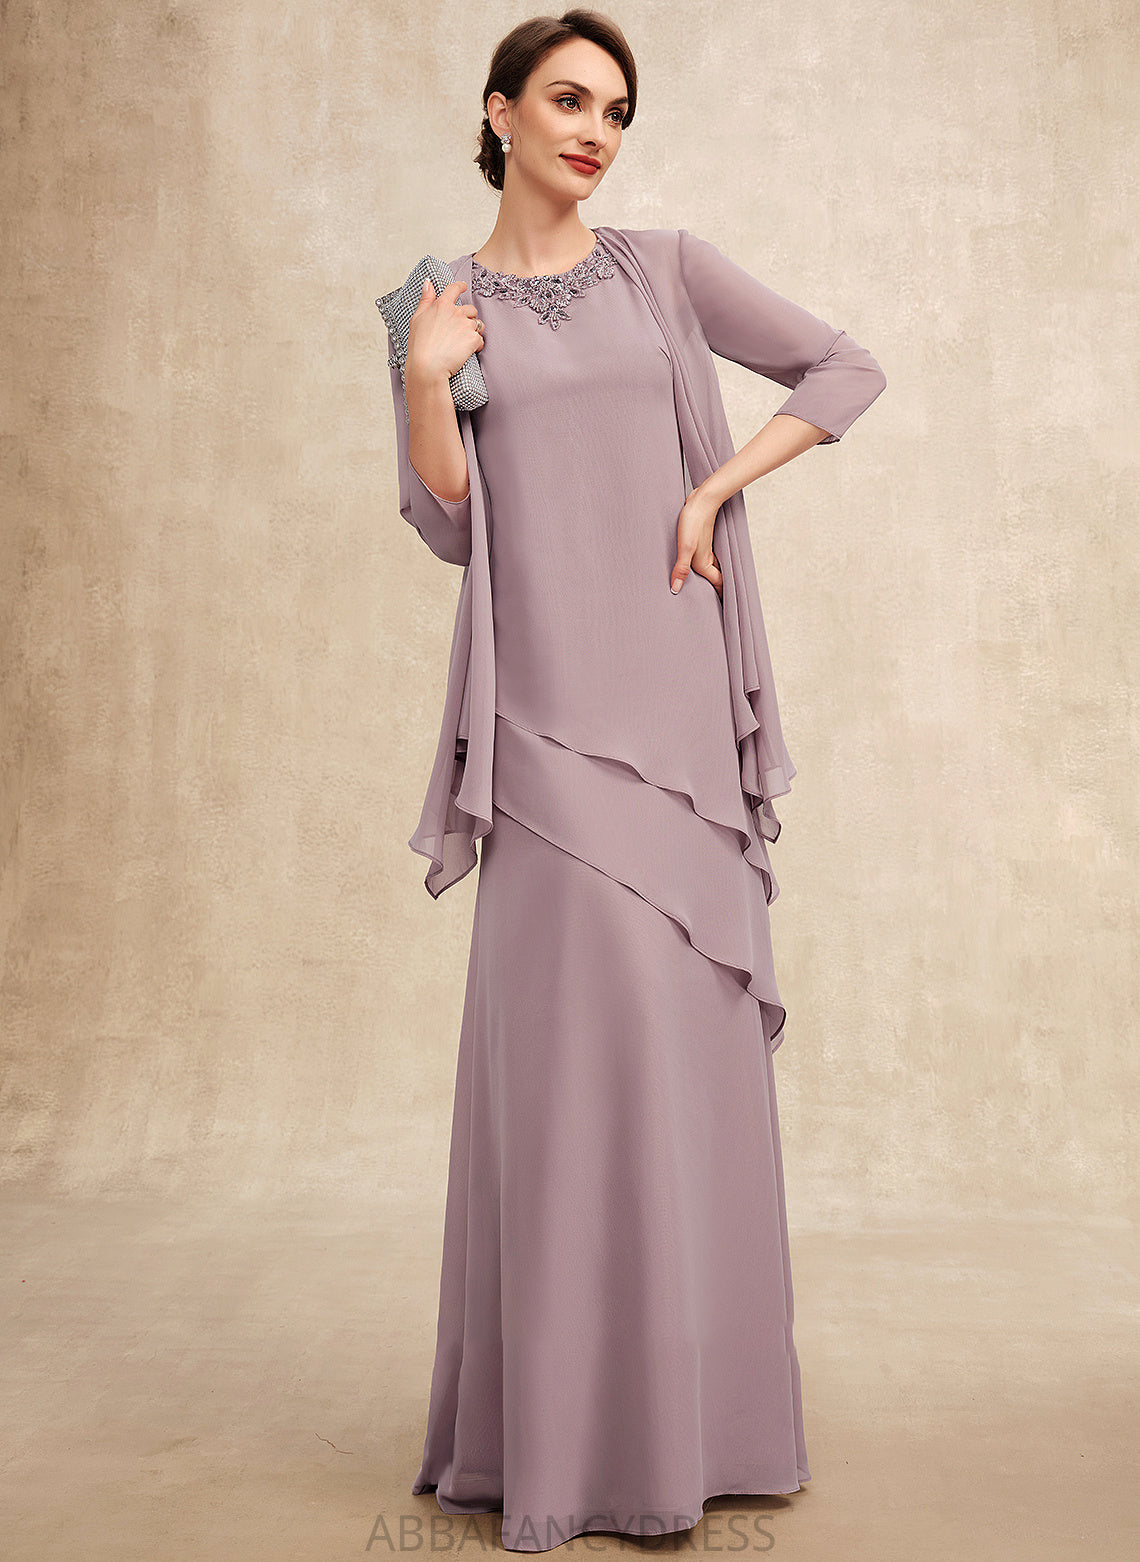 Scoop Mother of the Bride Dresses Bride Mother the Madison Neck Dress Floor-Length With of Chiffon A-Line Beading